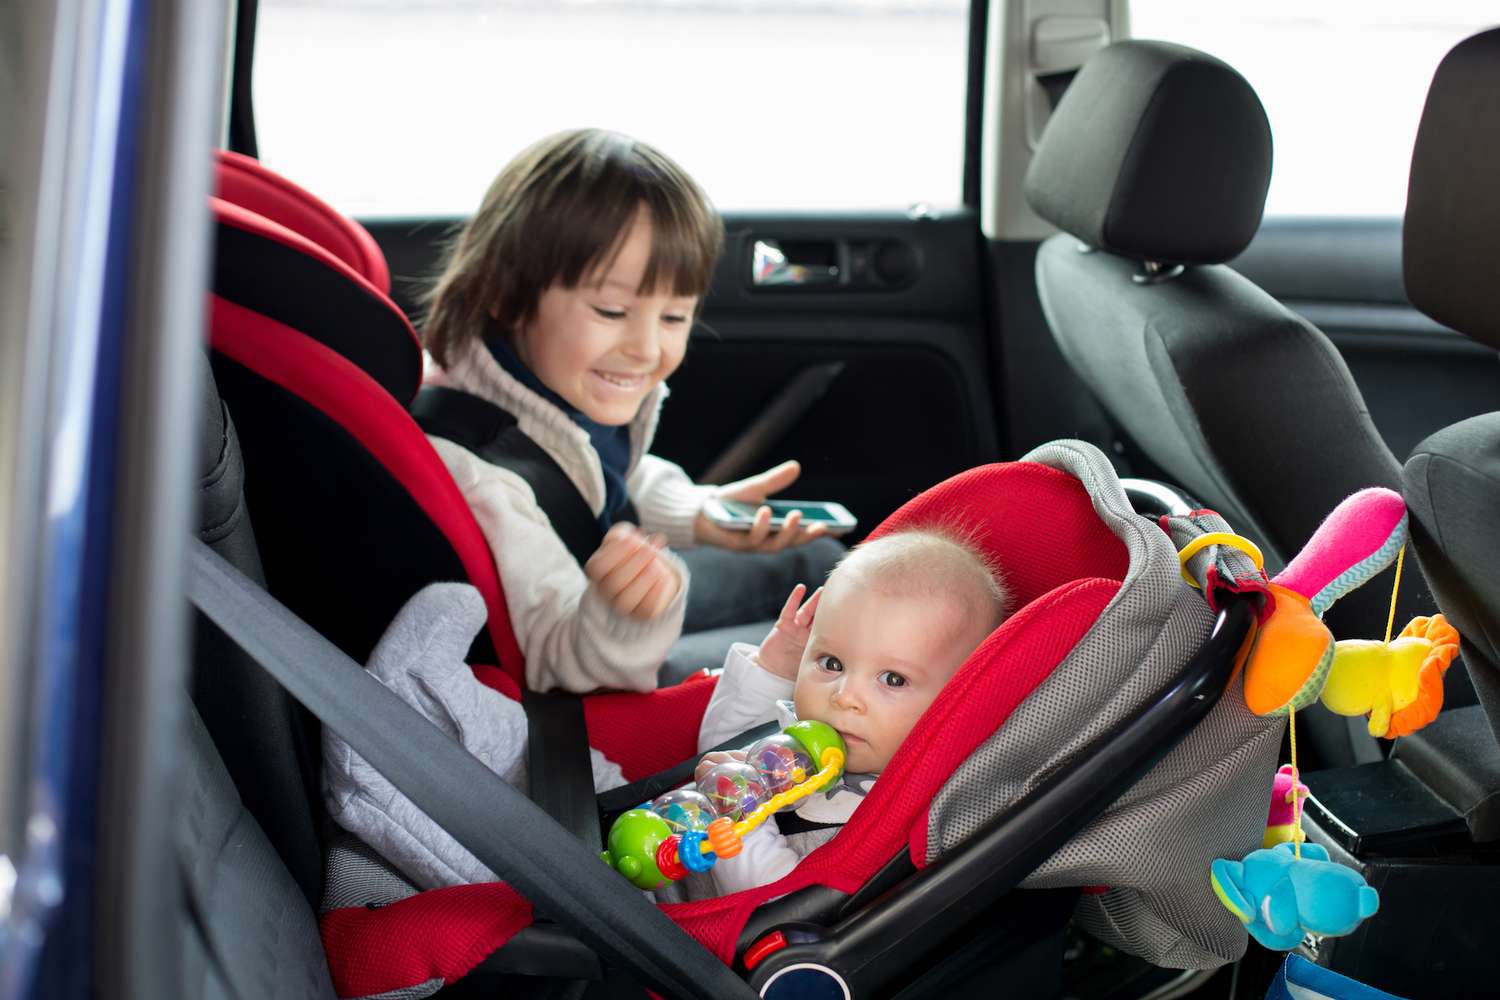 How To Choose The Right Car Seat For Your Child Pas - What Are The Best Car Seats For Infants